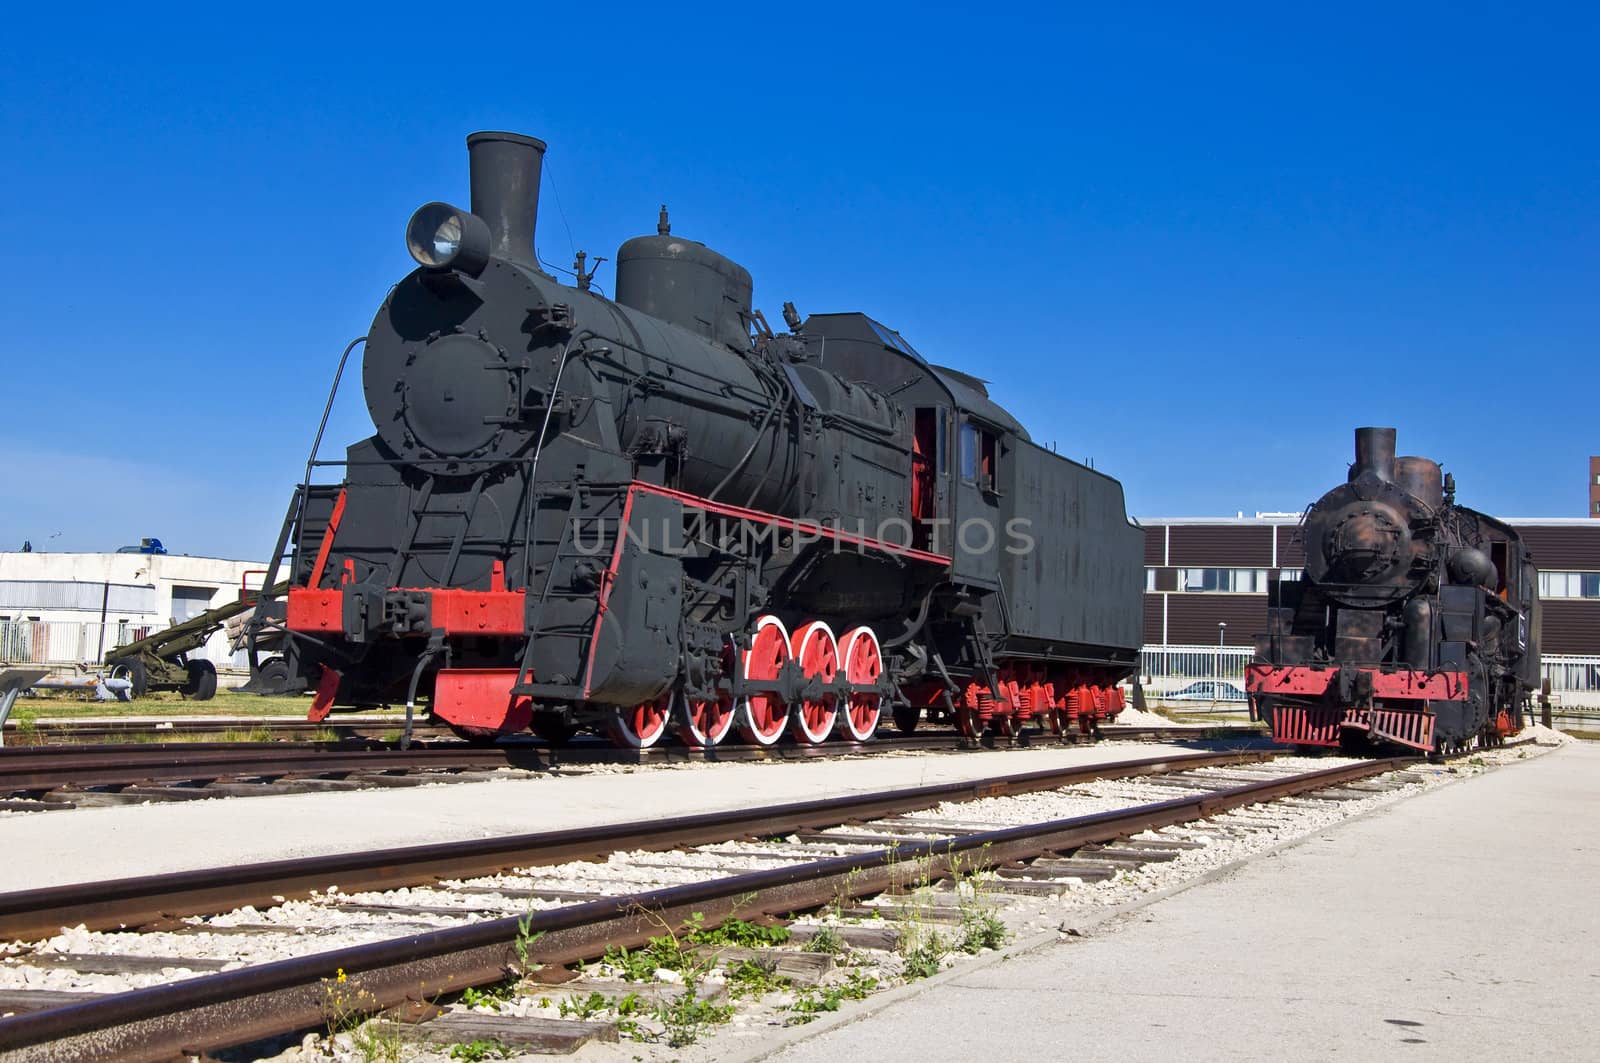 Old steam locomotive at the depot. Museum of Technology in Togliatti.